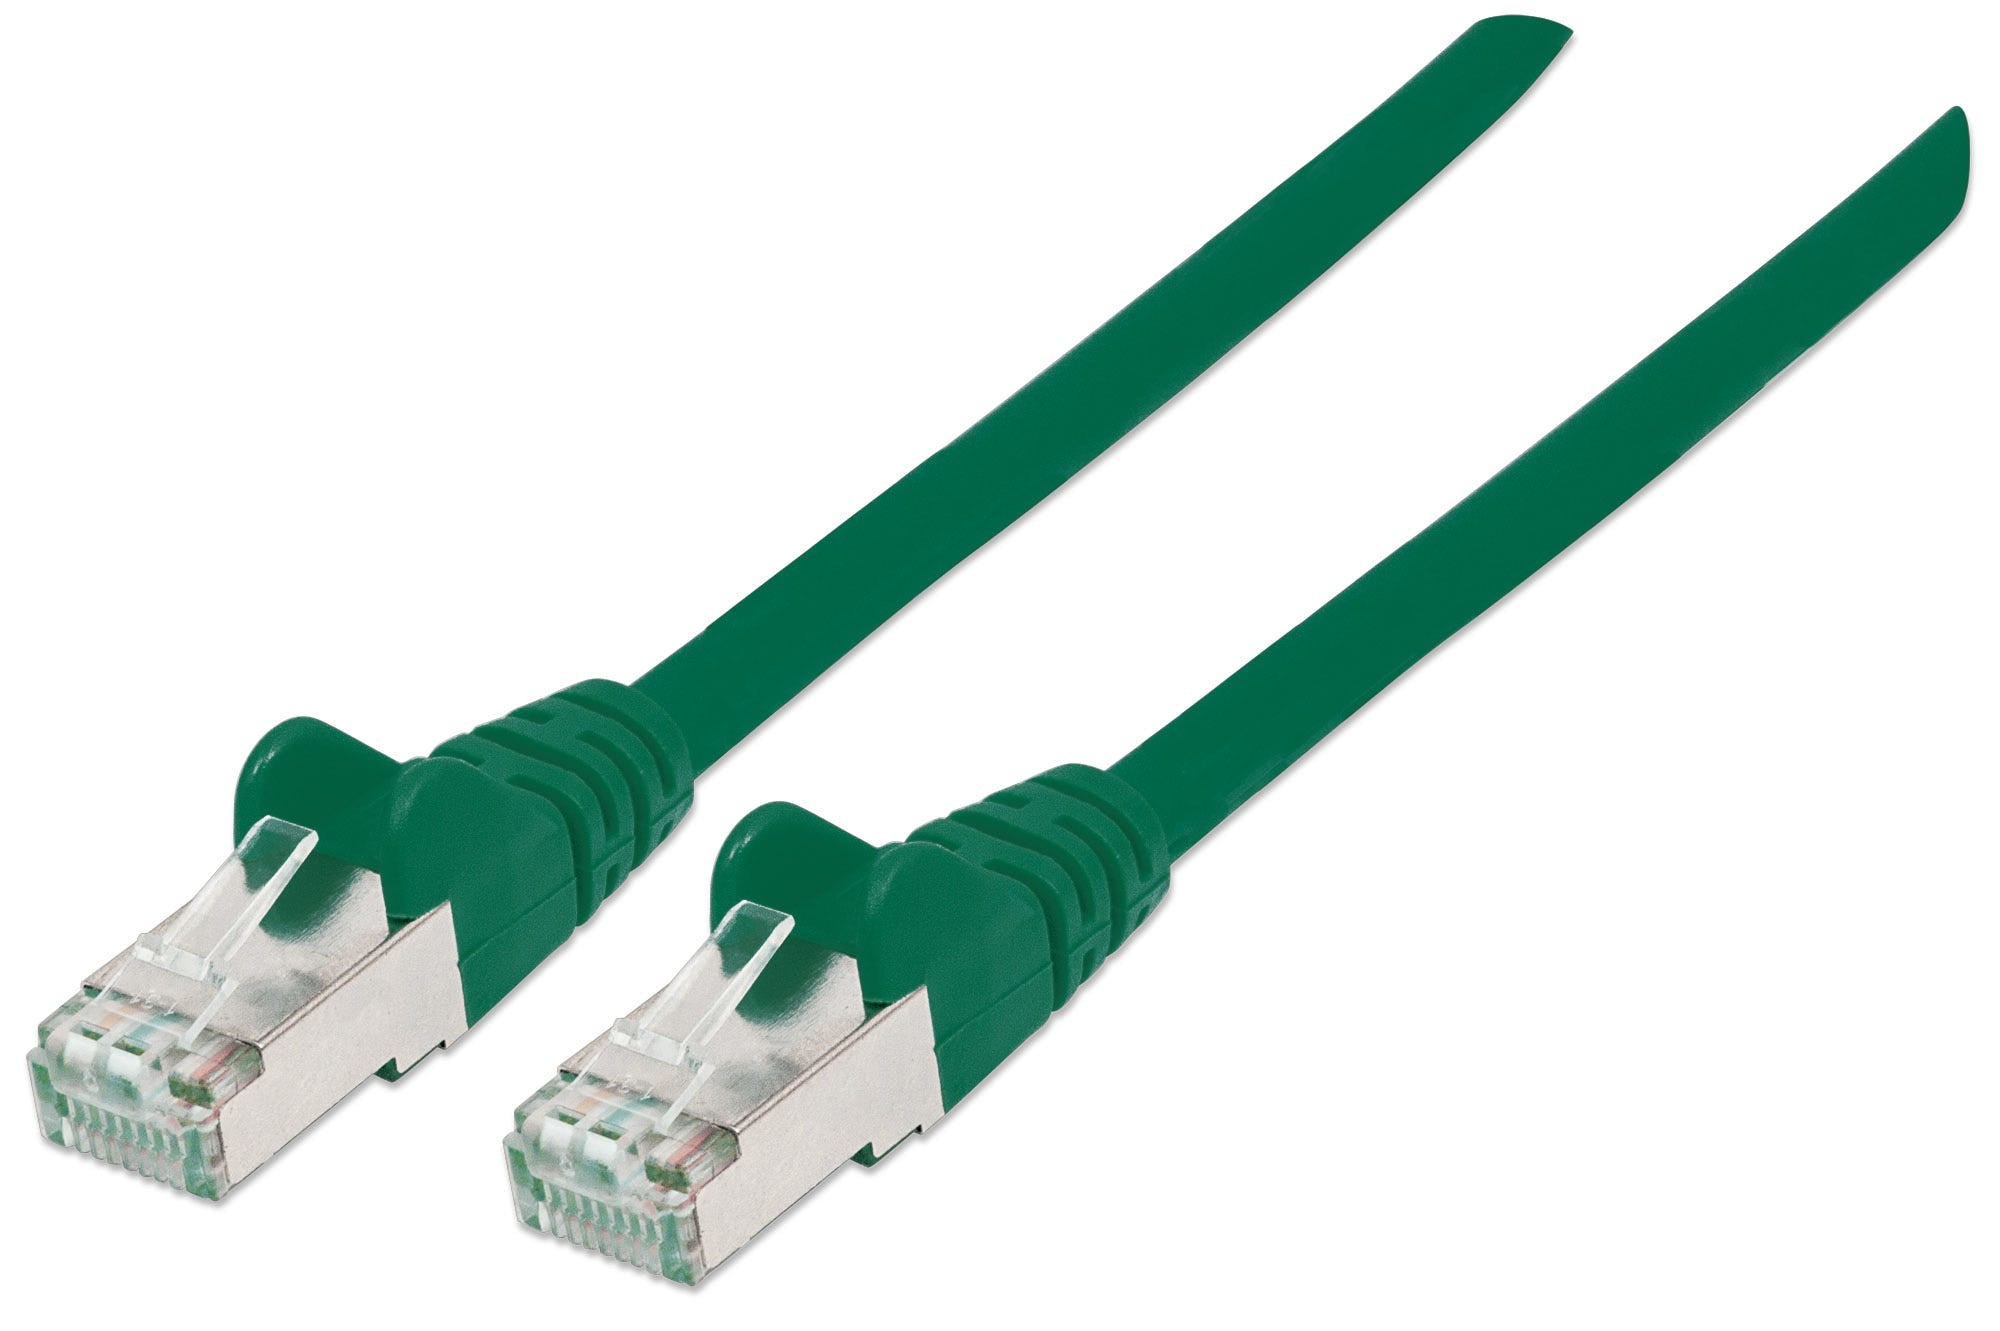 Intellinet Network Patch Cable, Cat6, 1m, Green, Copper, S/FTP, LSOH / LSZH, PVC, RJ45, Gold Plated Contacts, Snagless, Booted, Lifetime Warranty, Polybag